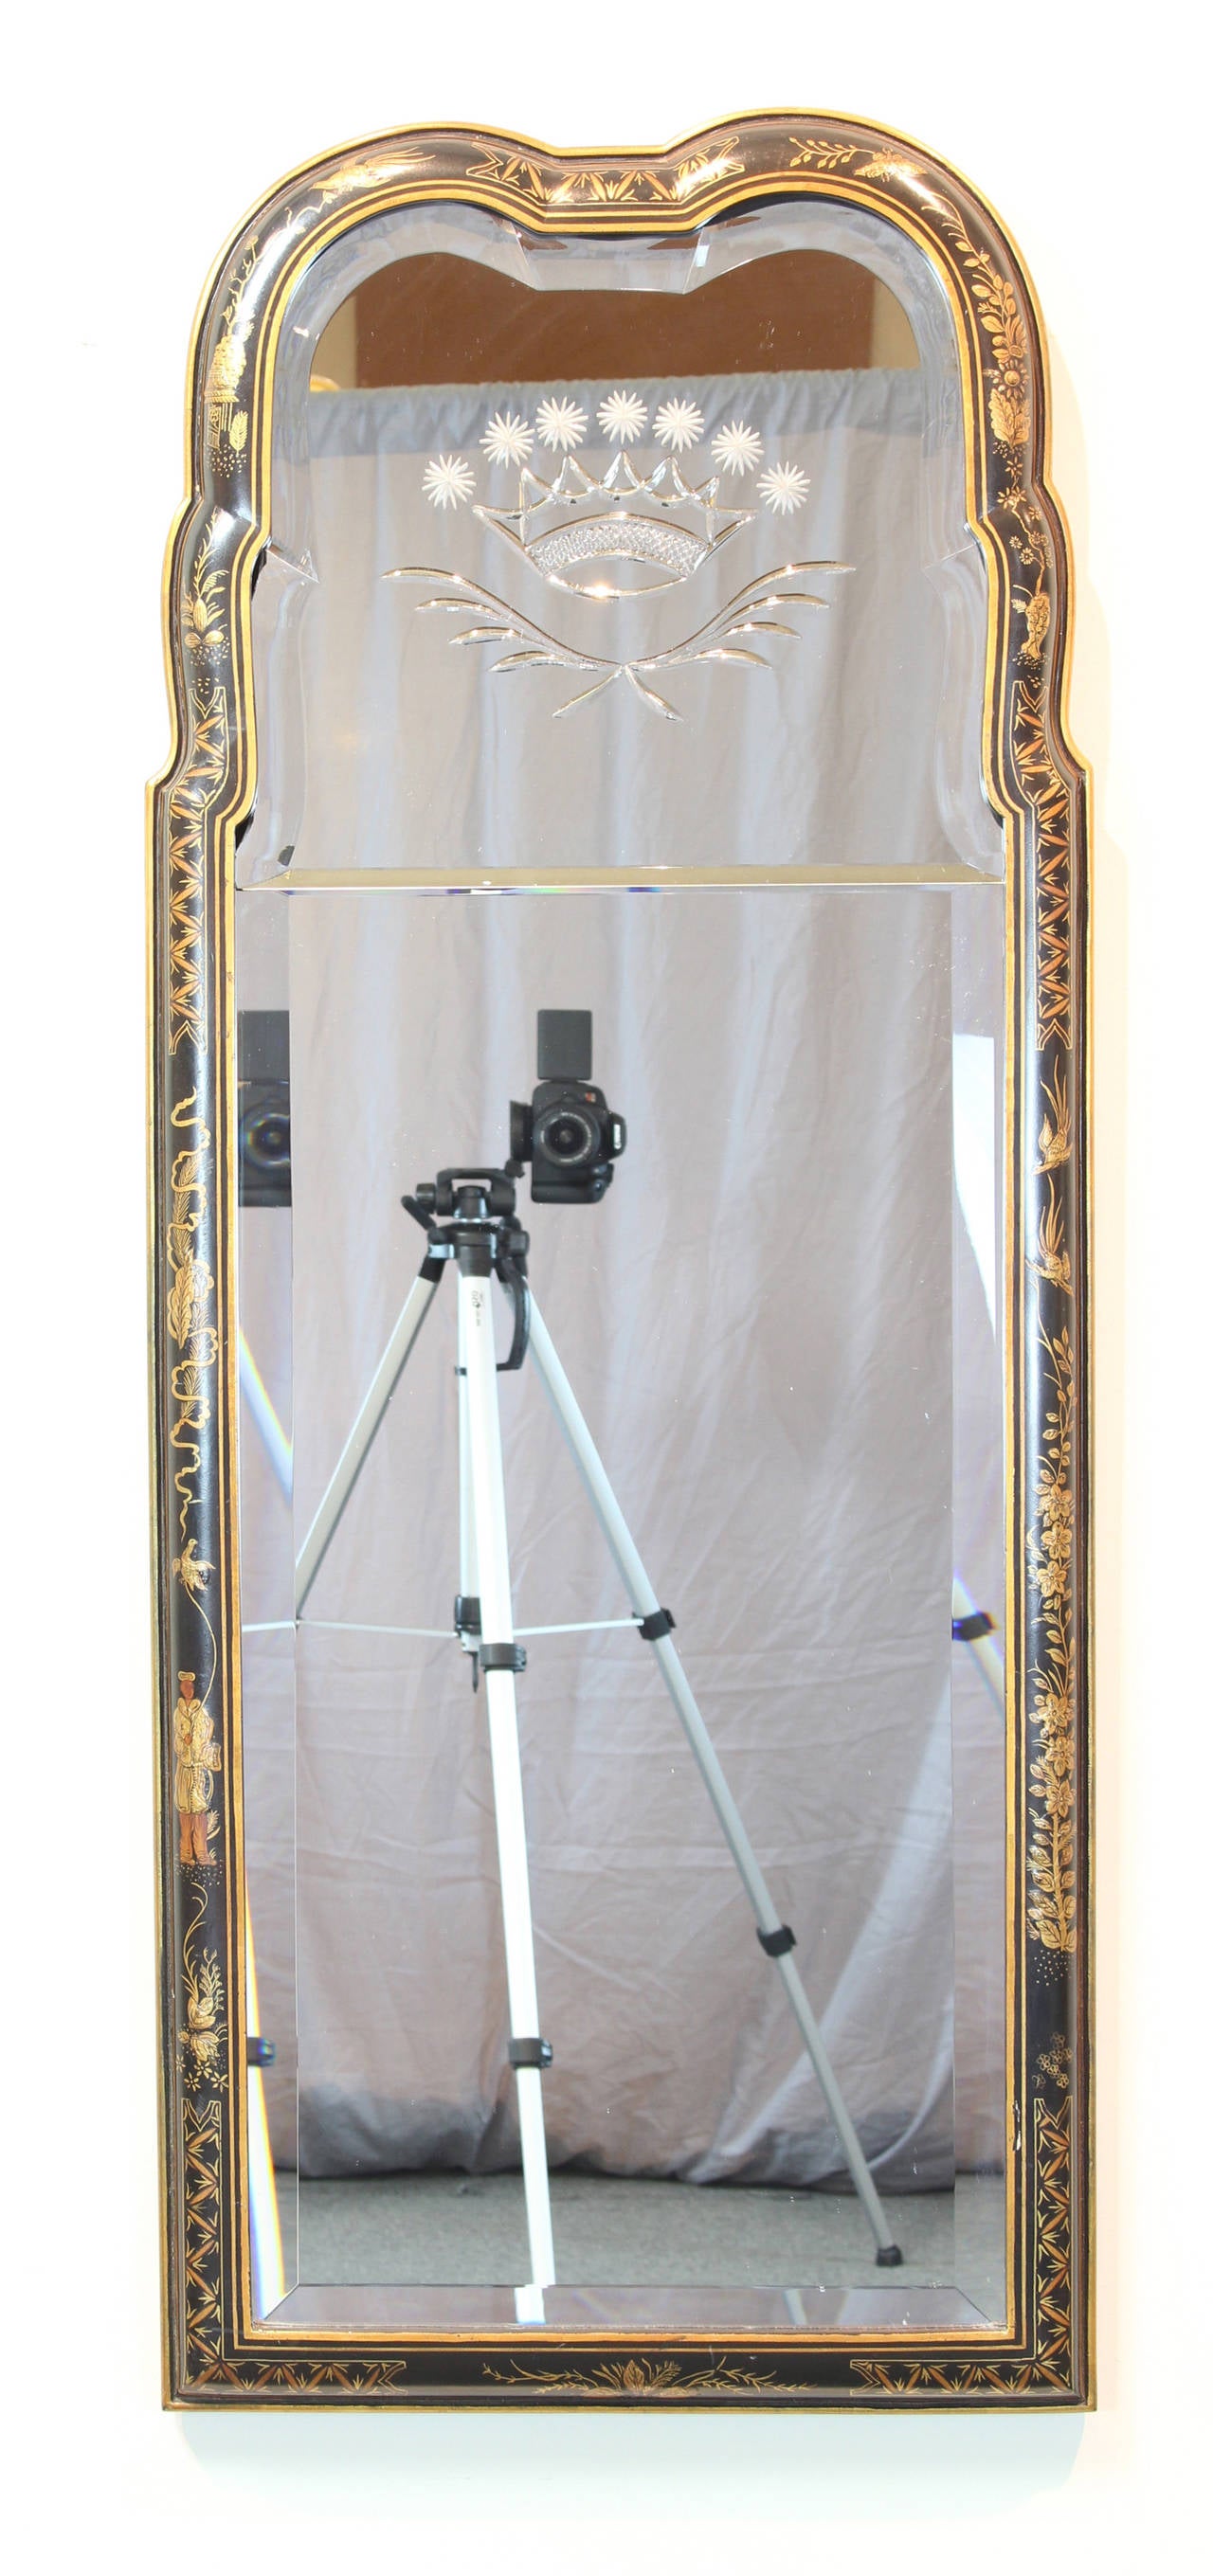 An elegant chinoiserie decorated Queen Anne style mirror made in the late 1980's for the Winterthur collection.